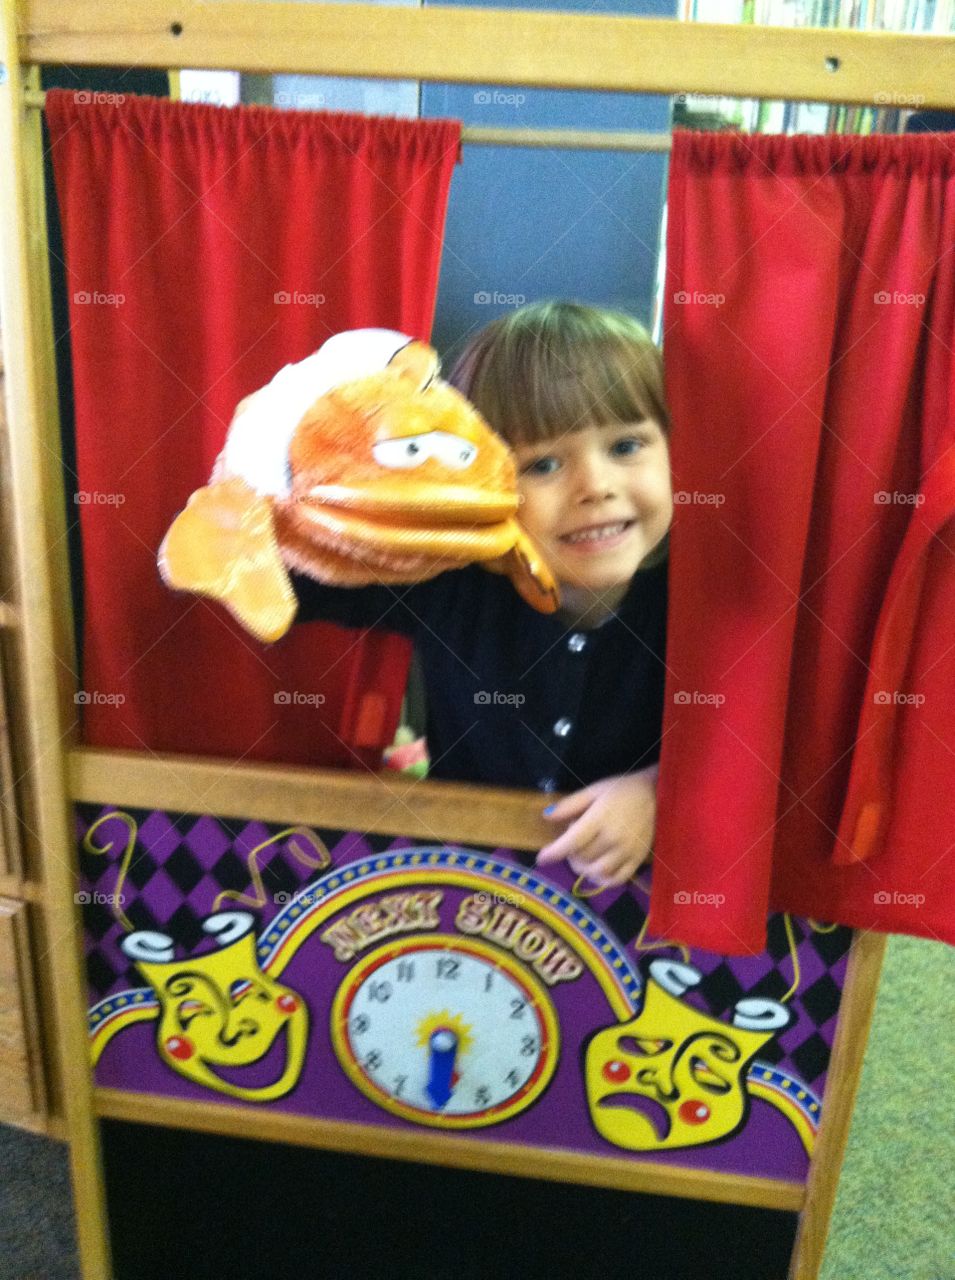 puppet show. at the public library putting on a puppet show